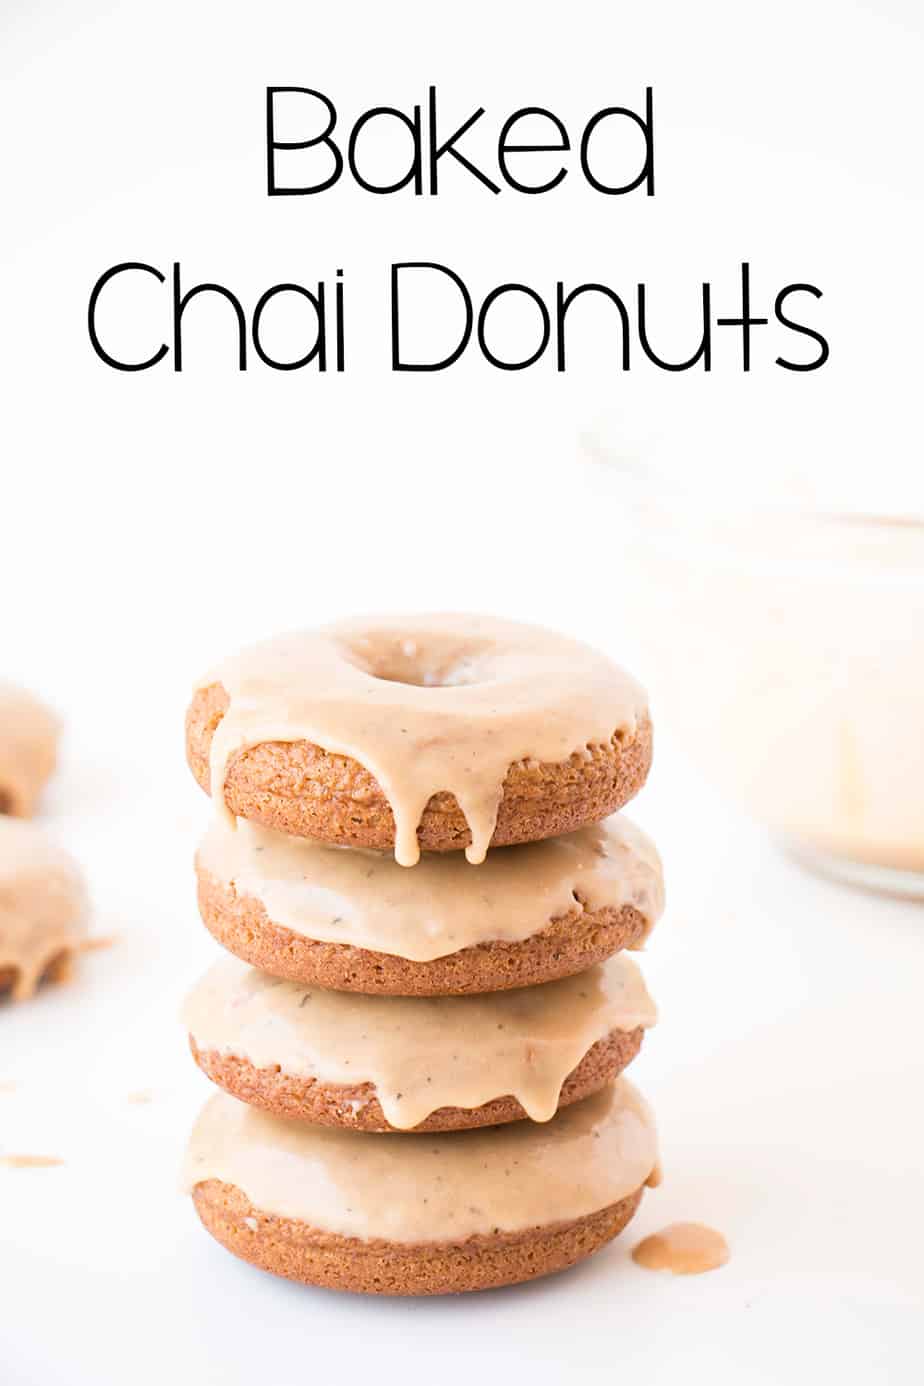 Baked Chai Donuts with title.